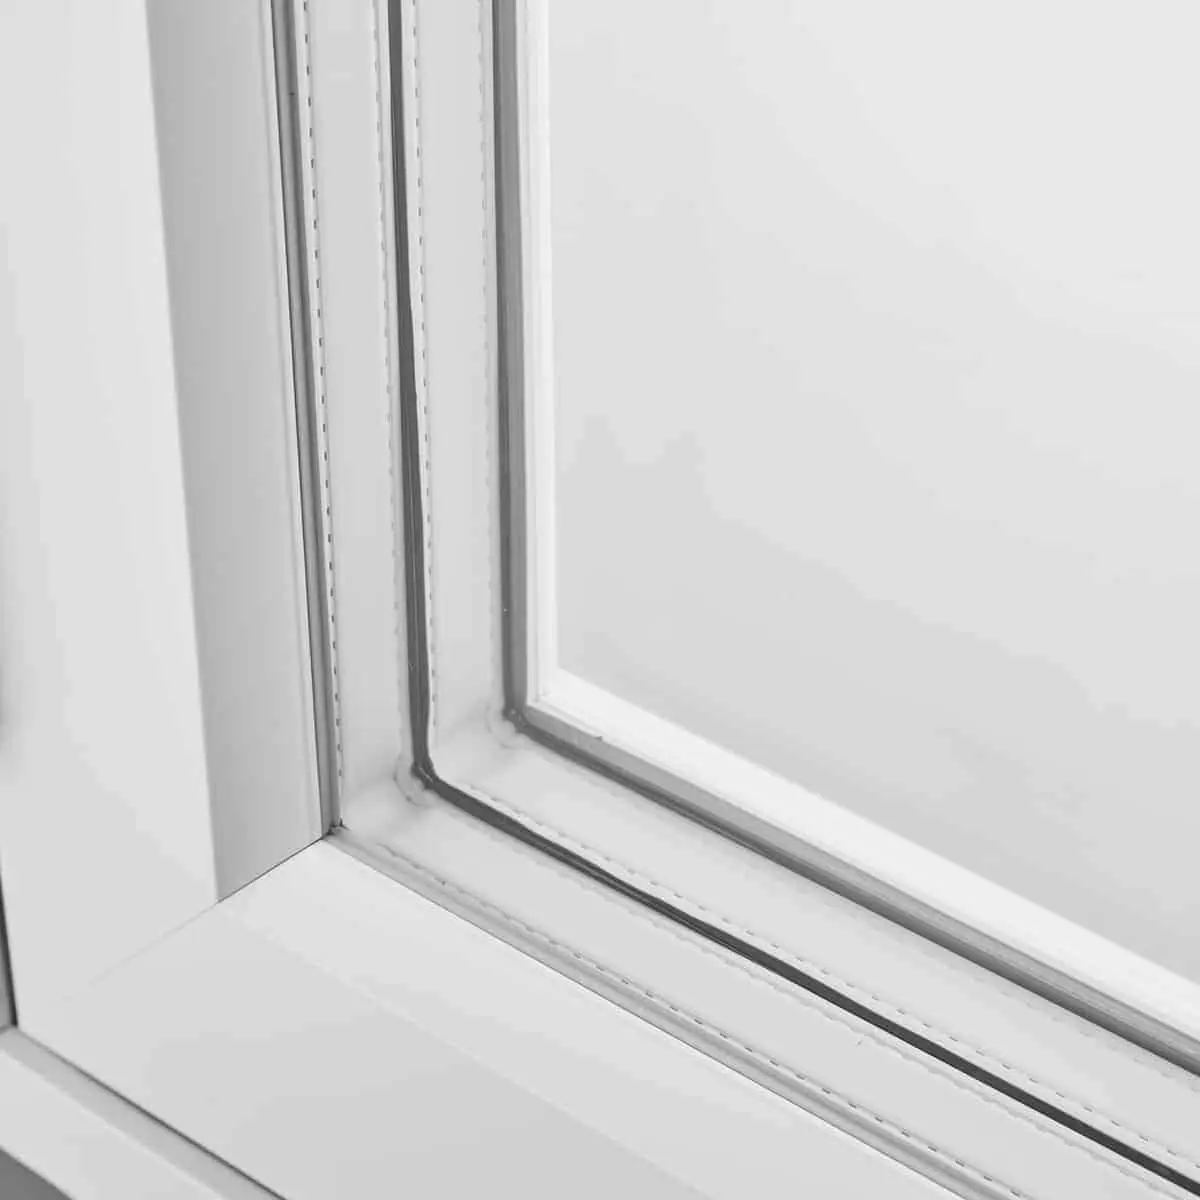 How a noise reducing window works